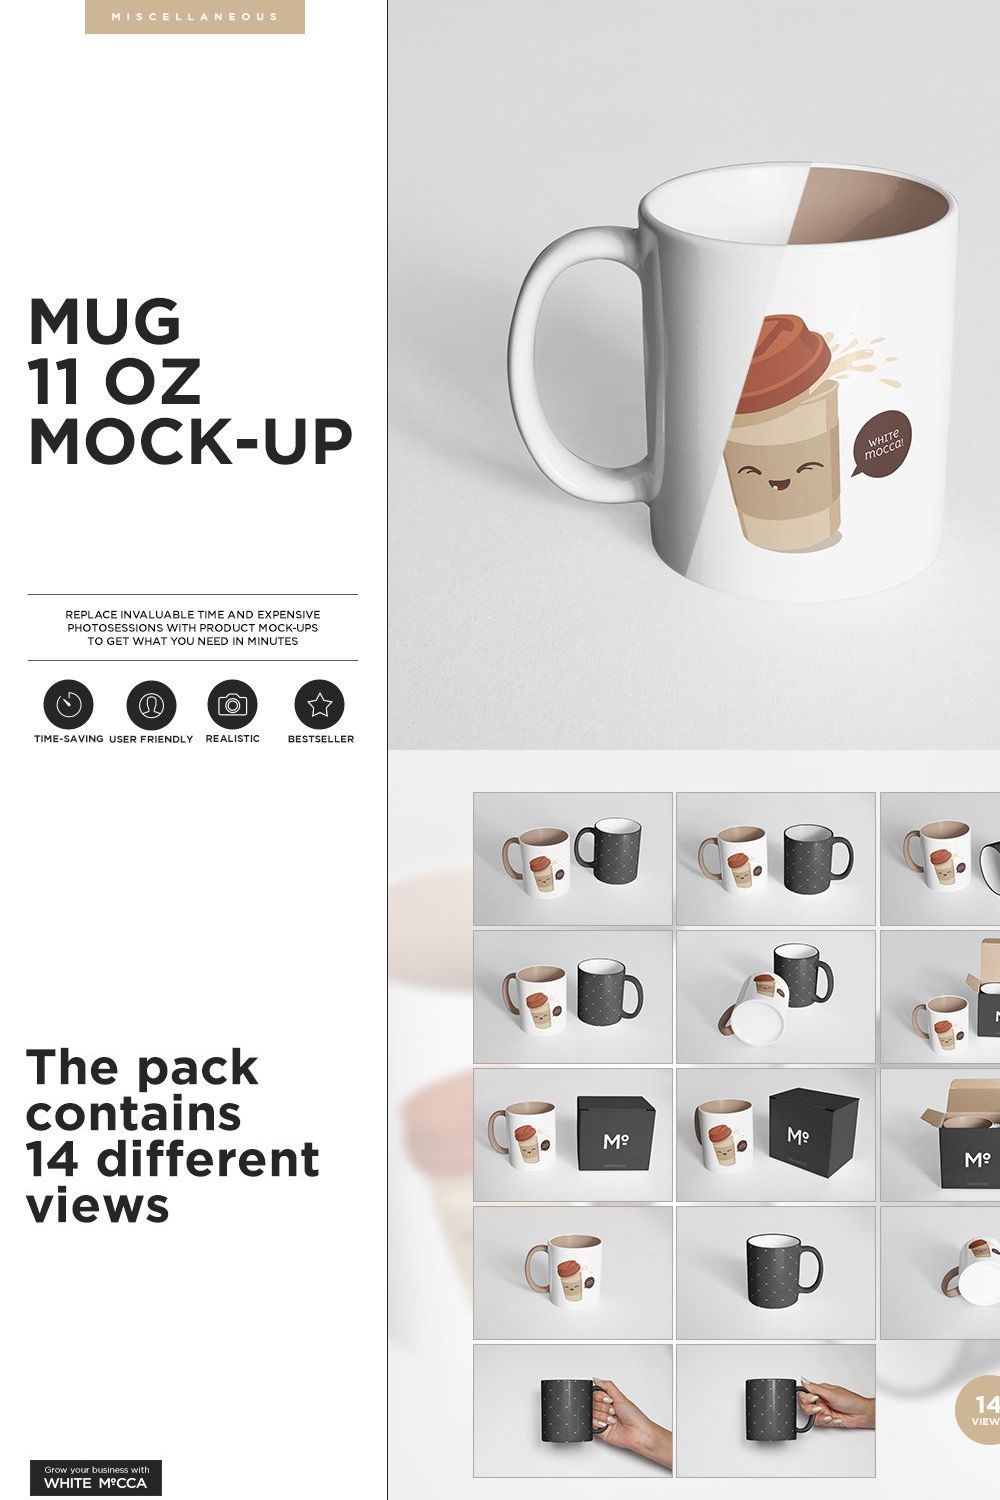 The Mugs 11 oz. and Box Mock-up pinterest preview image.